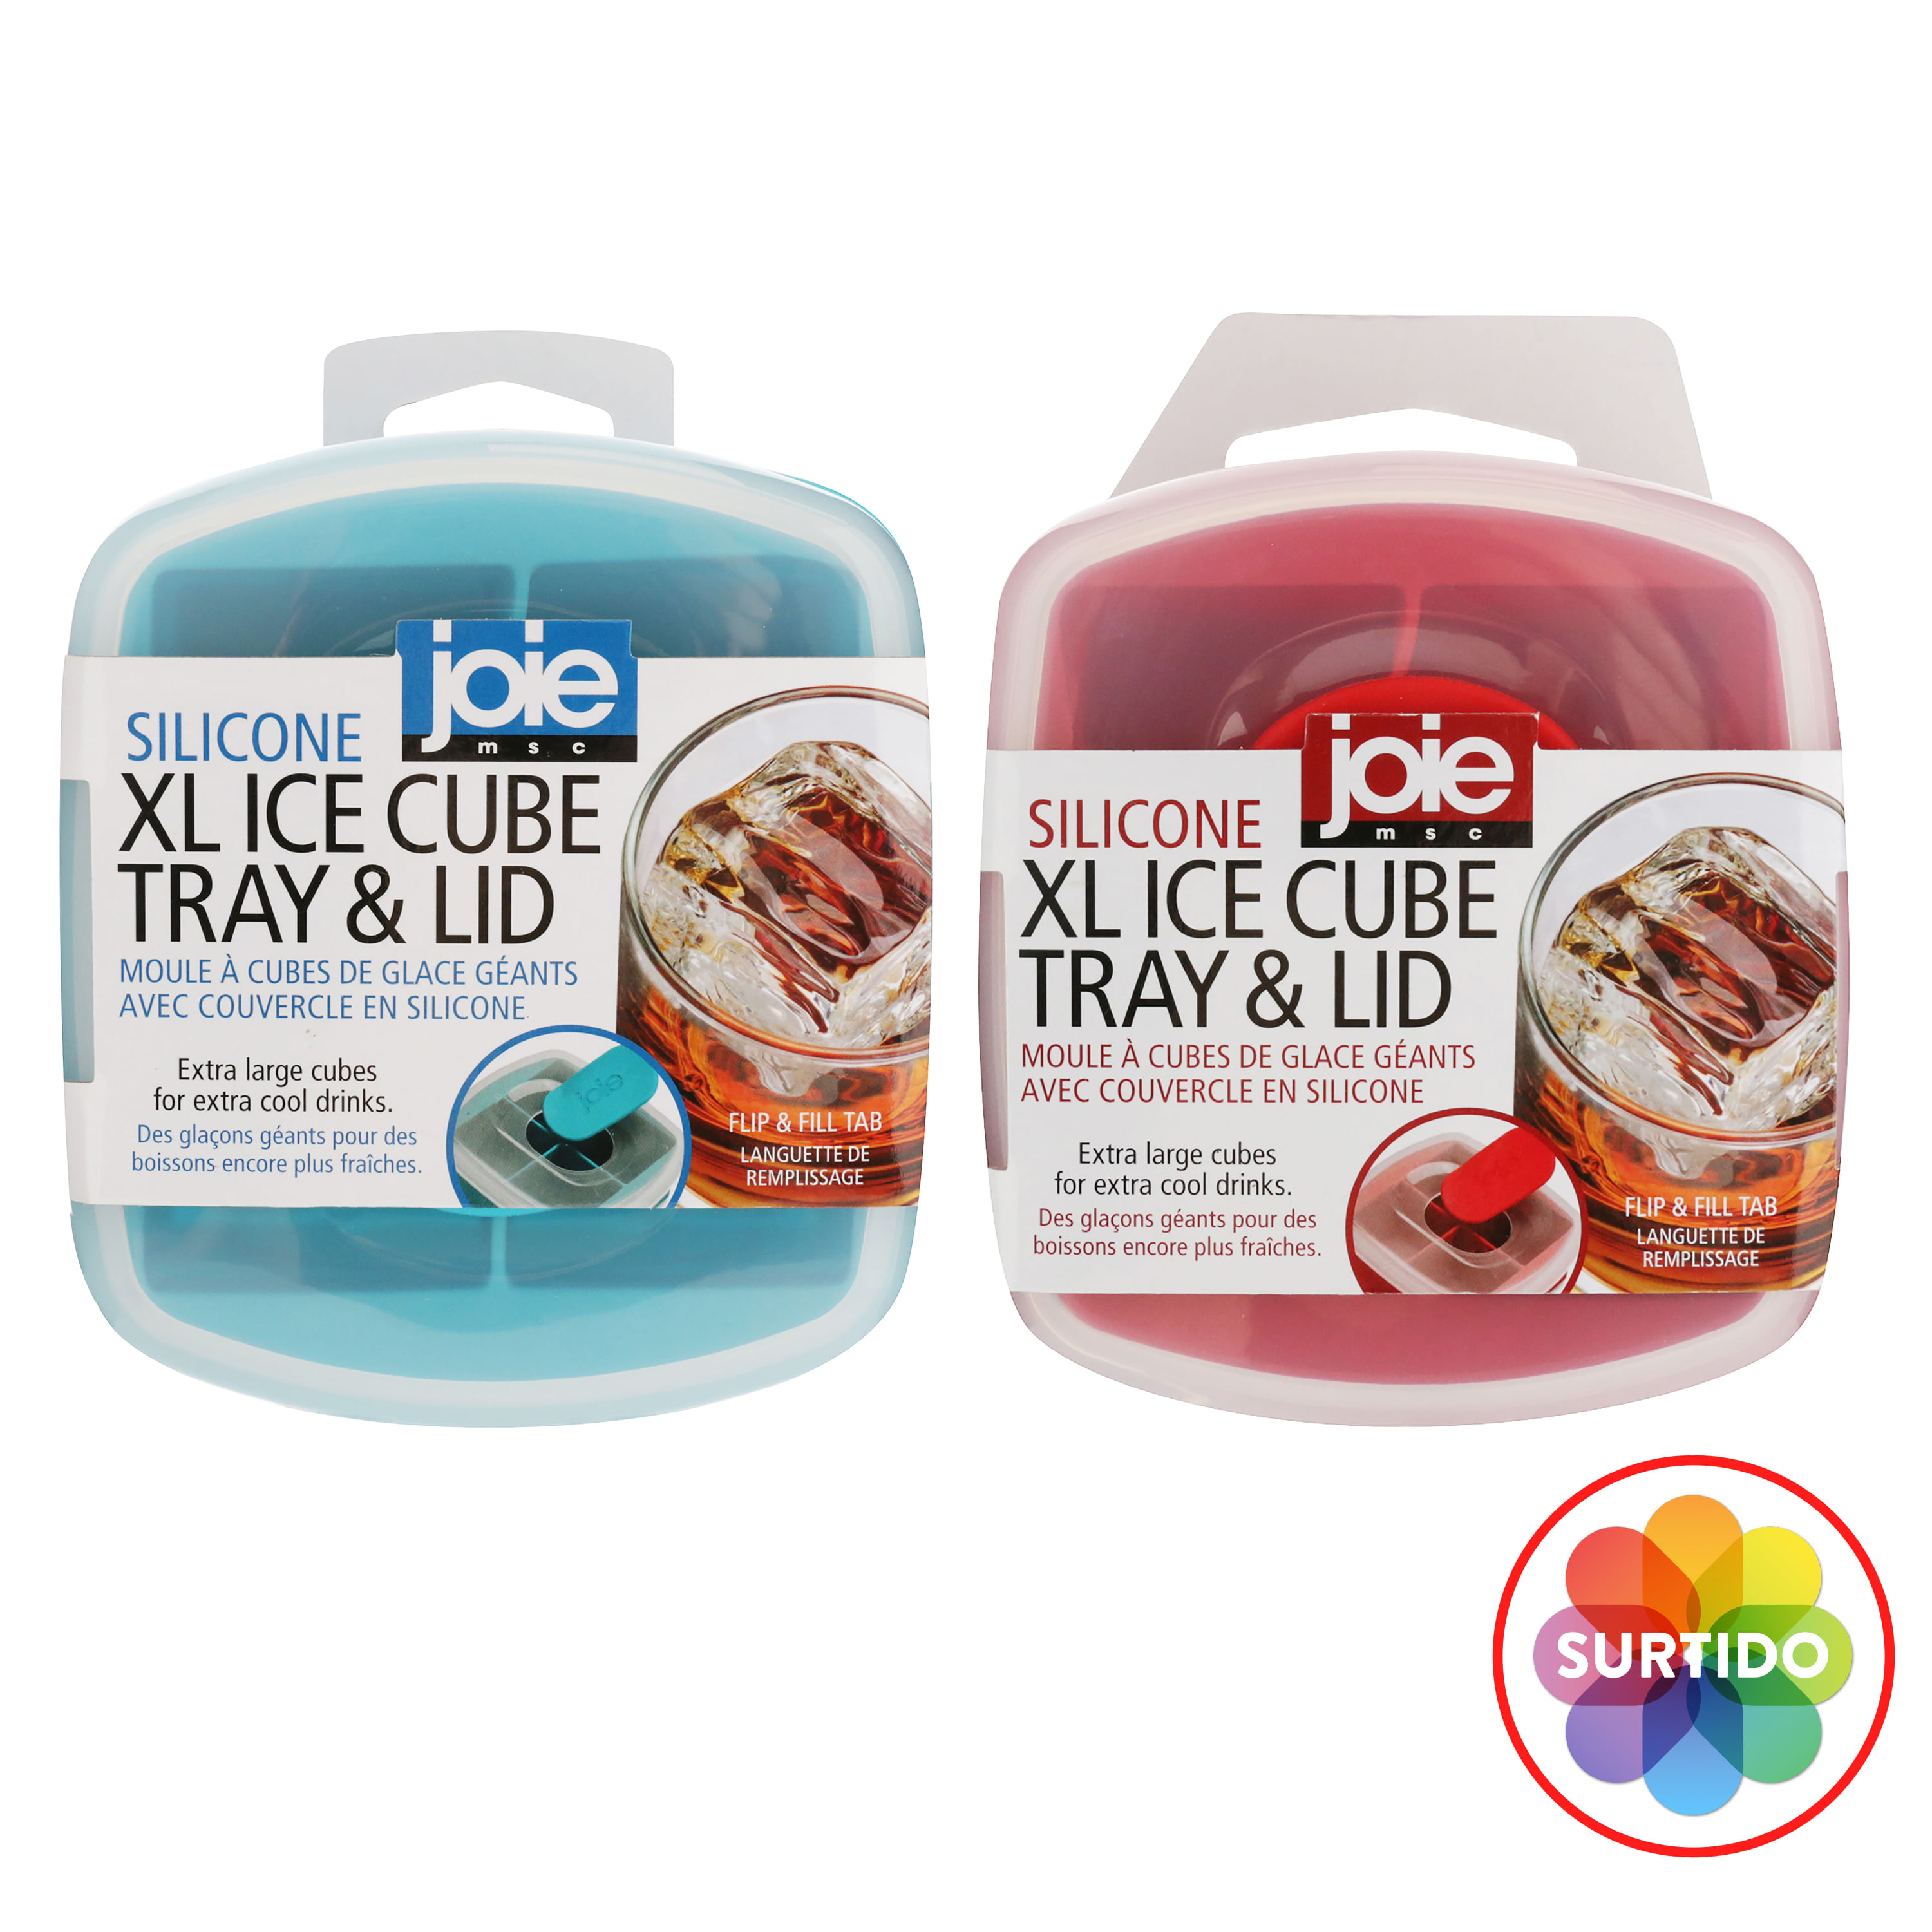 Joie XL Ice Cube Tray & Lid